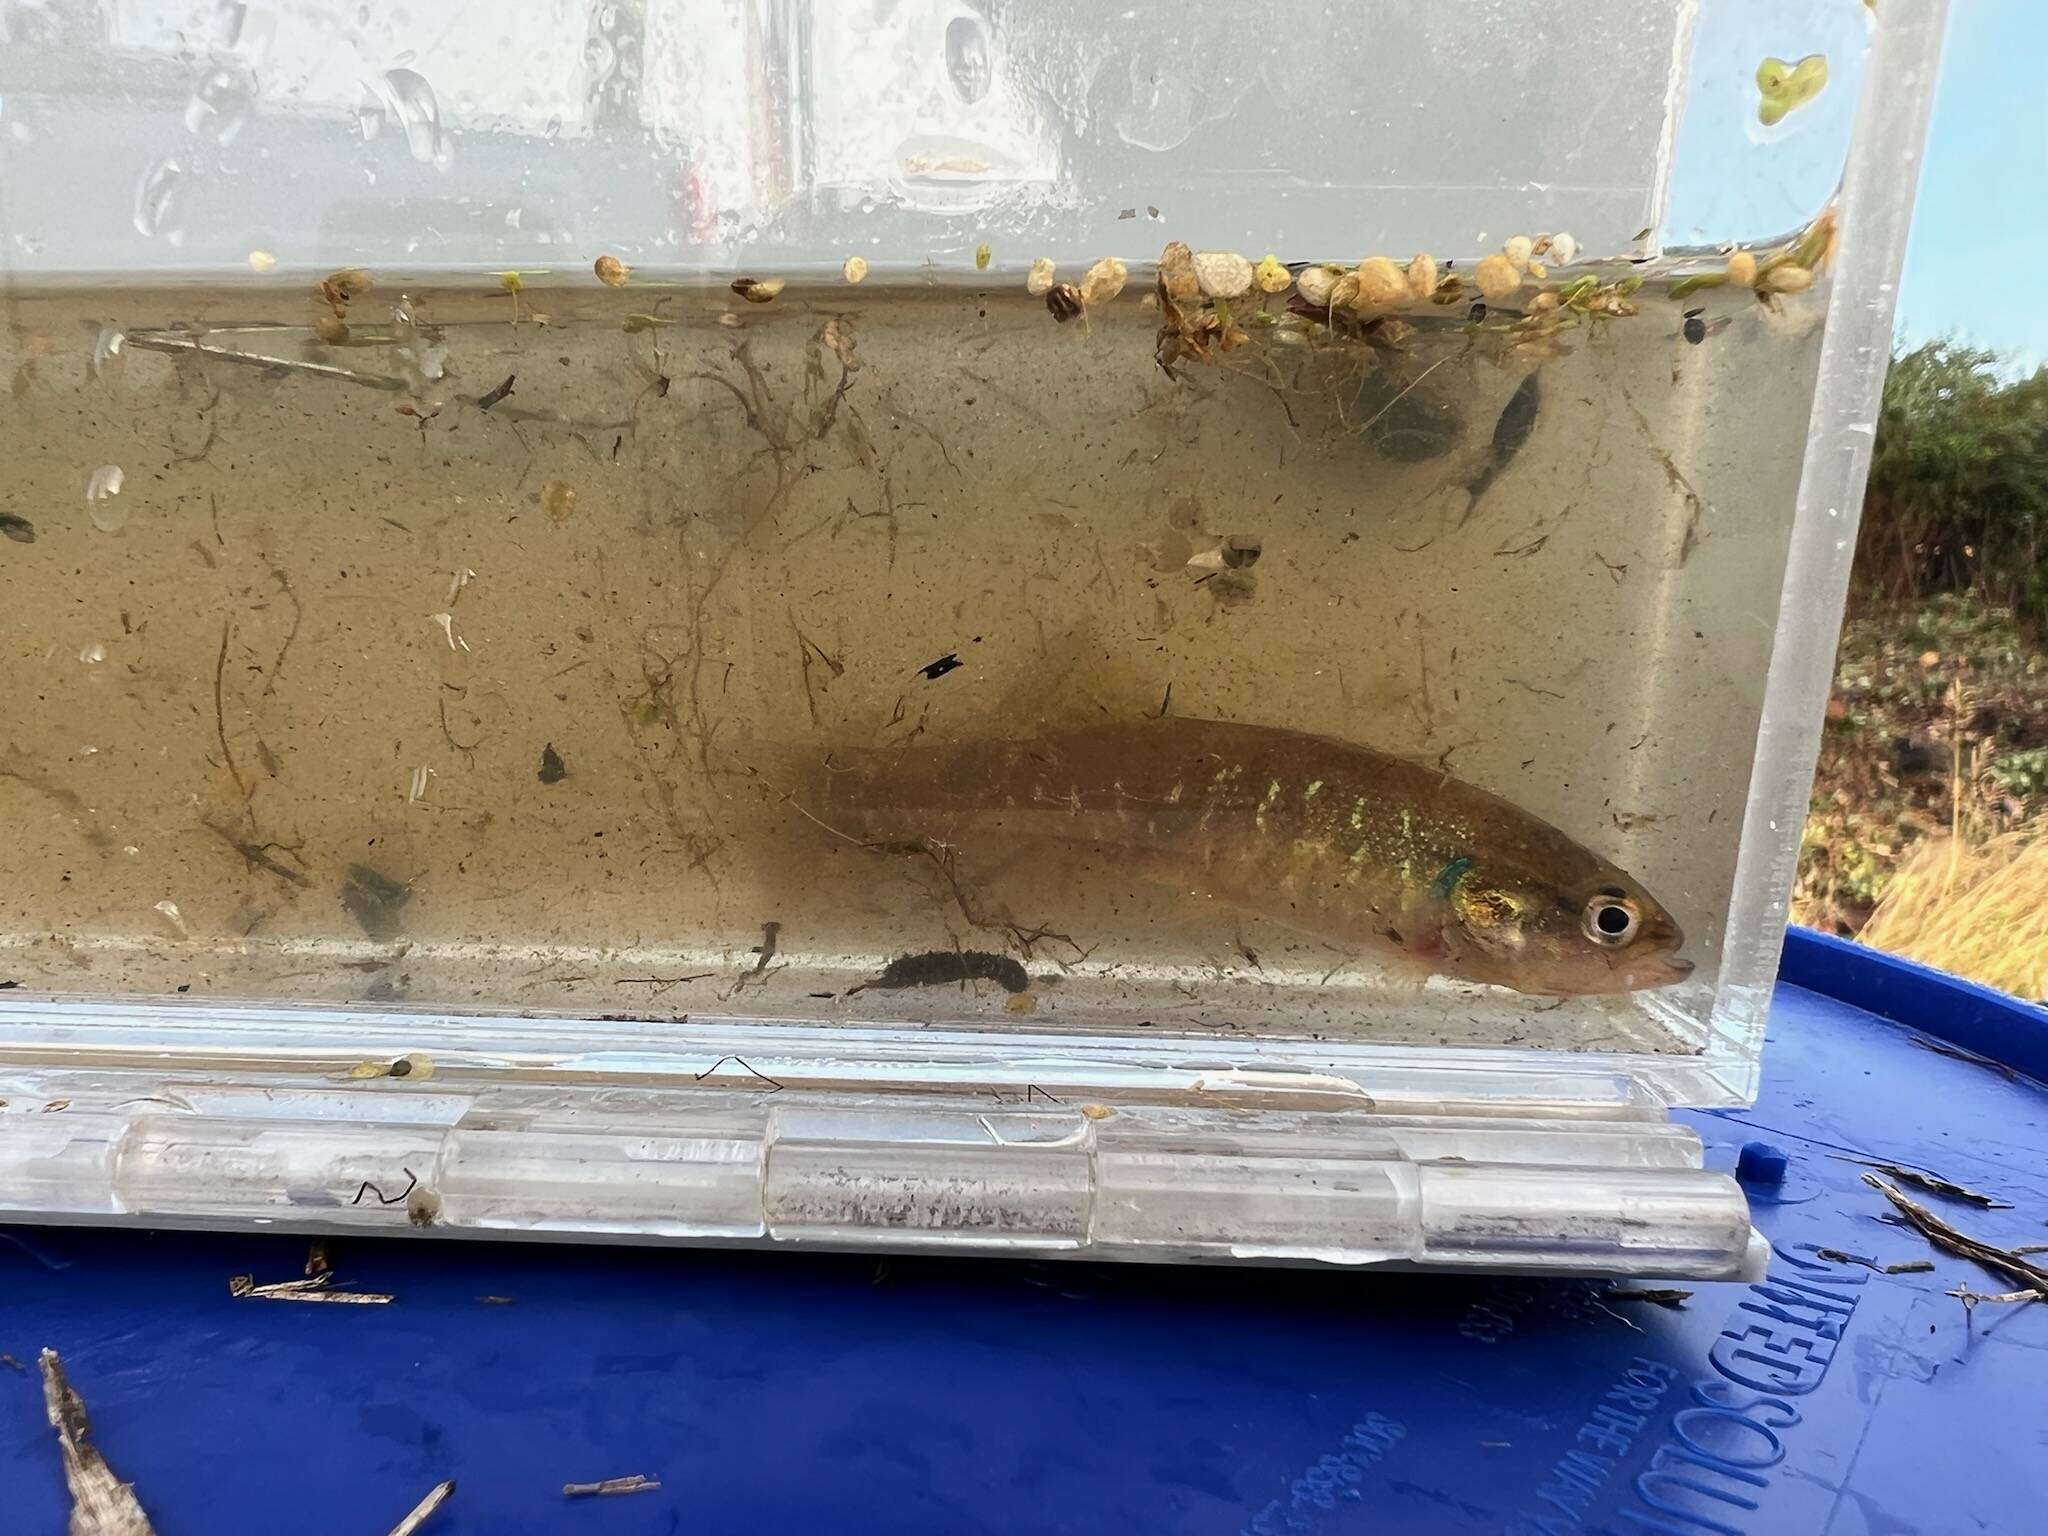 (Courtesy of Scott Andersen) The Olympic mudminnow is native to several watersheds in Western Washington, but isn't found anywhere else in the world. Crews captured hundreds of fish, including this one, from Oyehut Ditch last month.